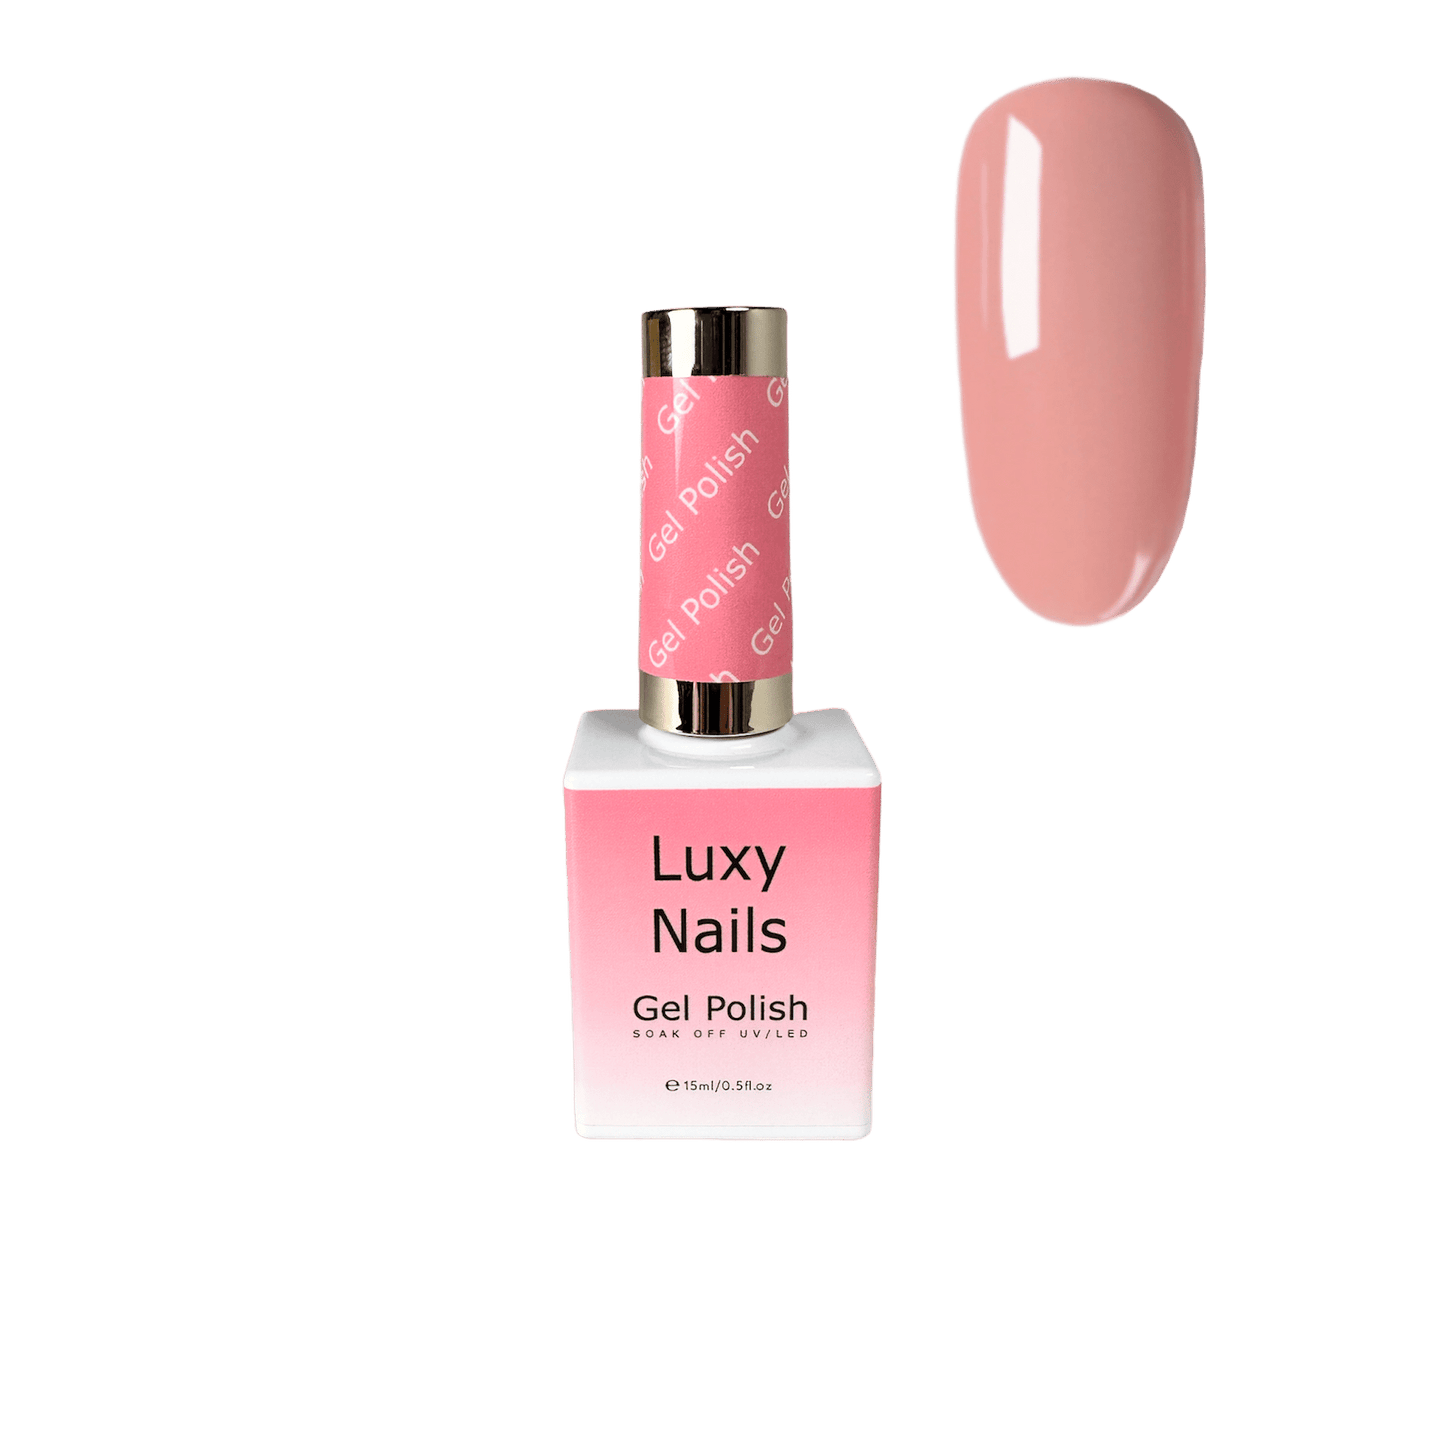 New Luxy Nails Gel Polish - Have You Ever